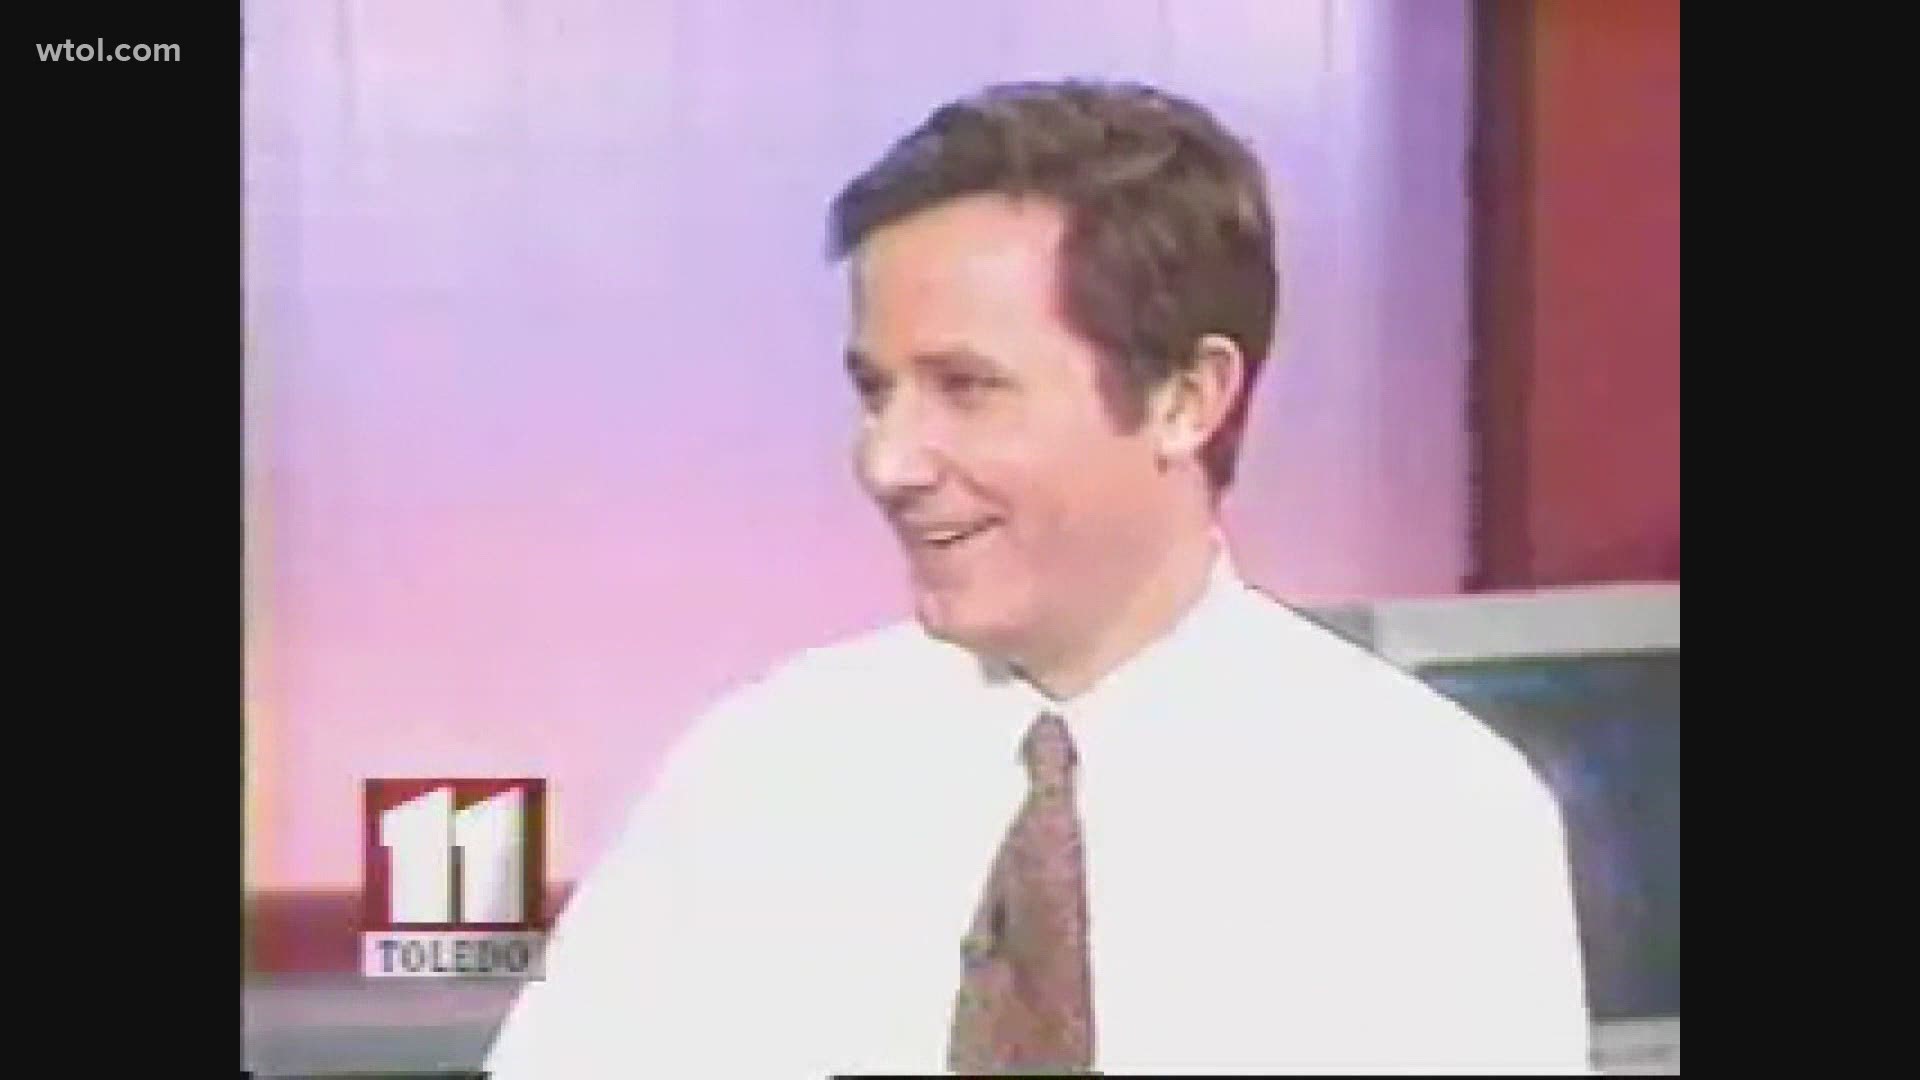 'You're clear!' Robert spent his final day at WTOL 11 reminiscing with friends and family. It was a fond celebration to cap off his broadcast career.